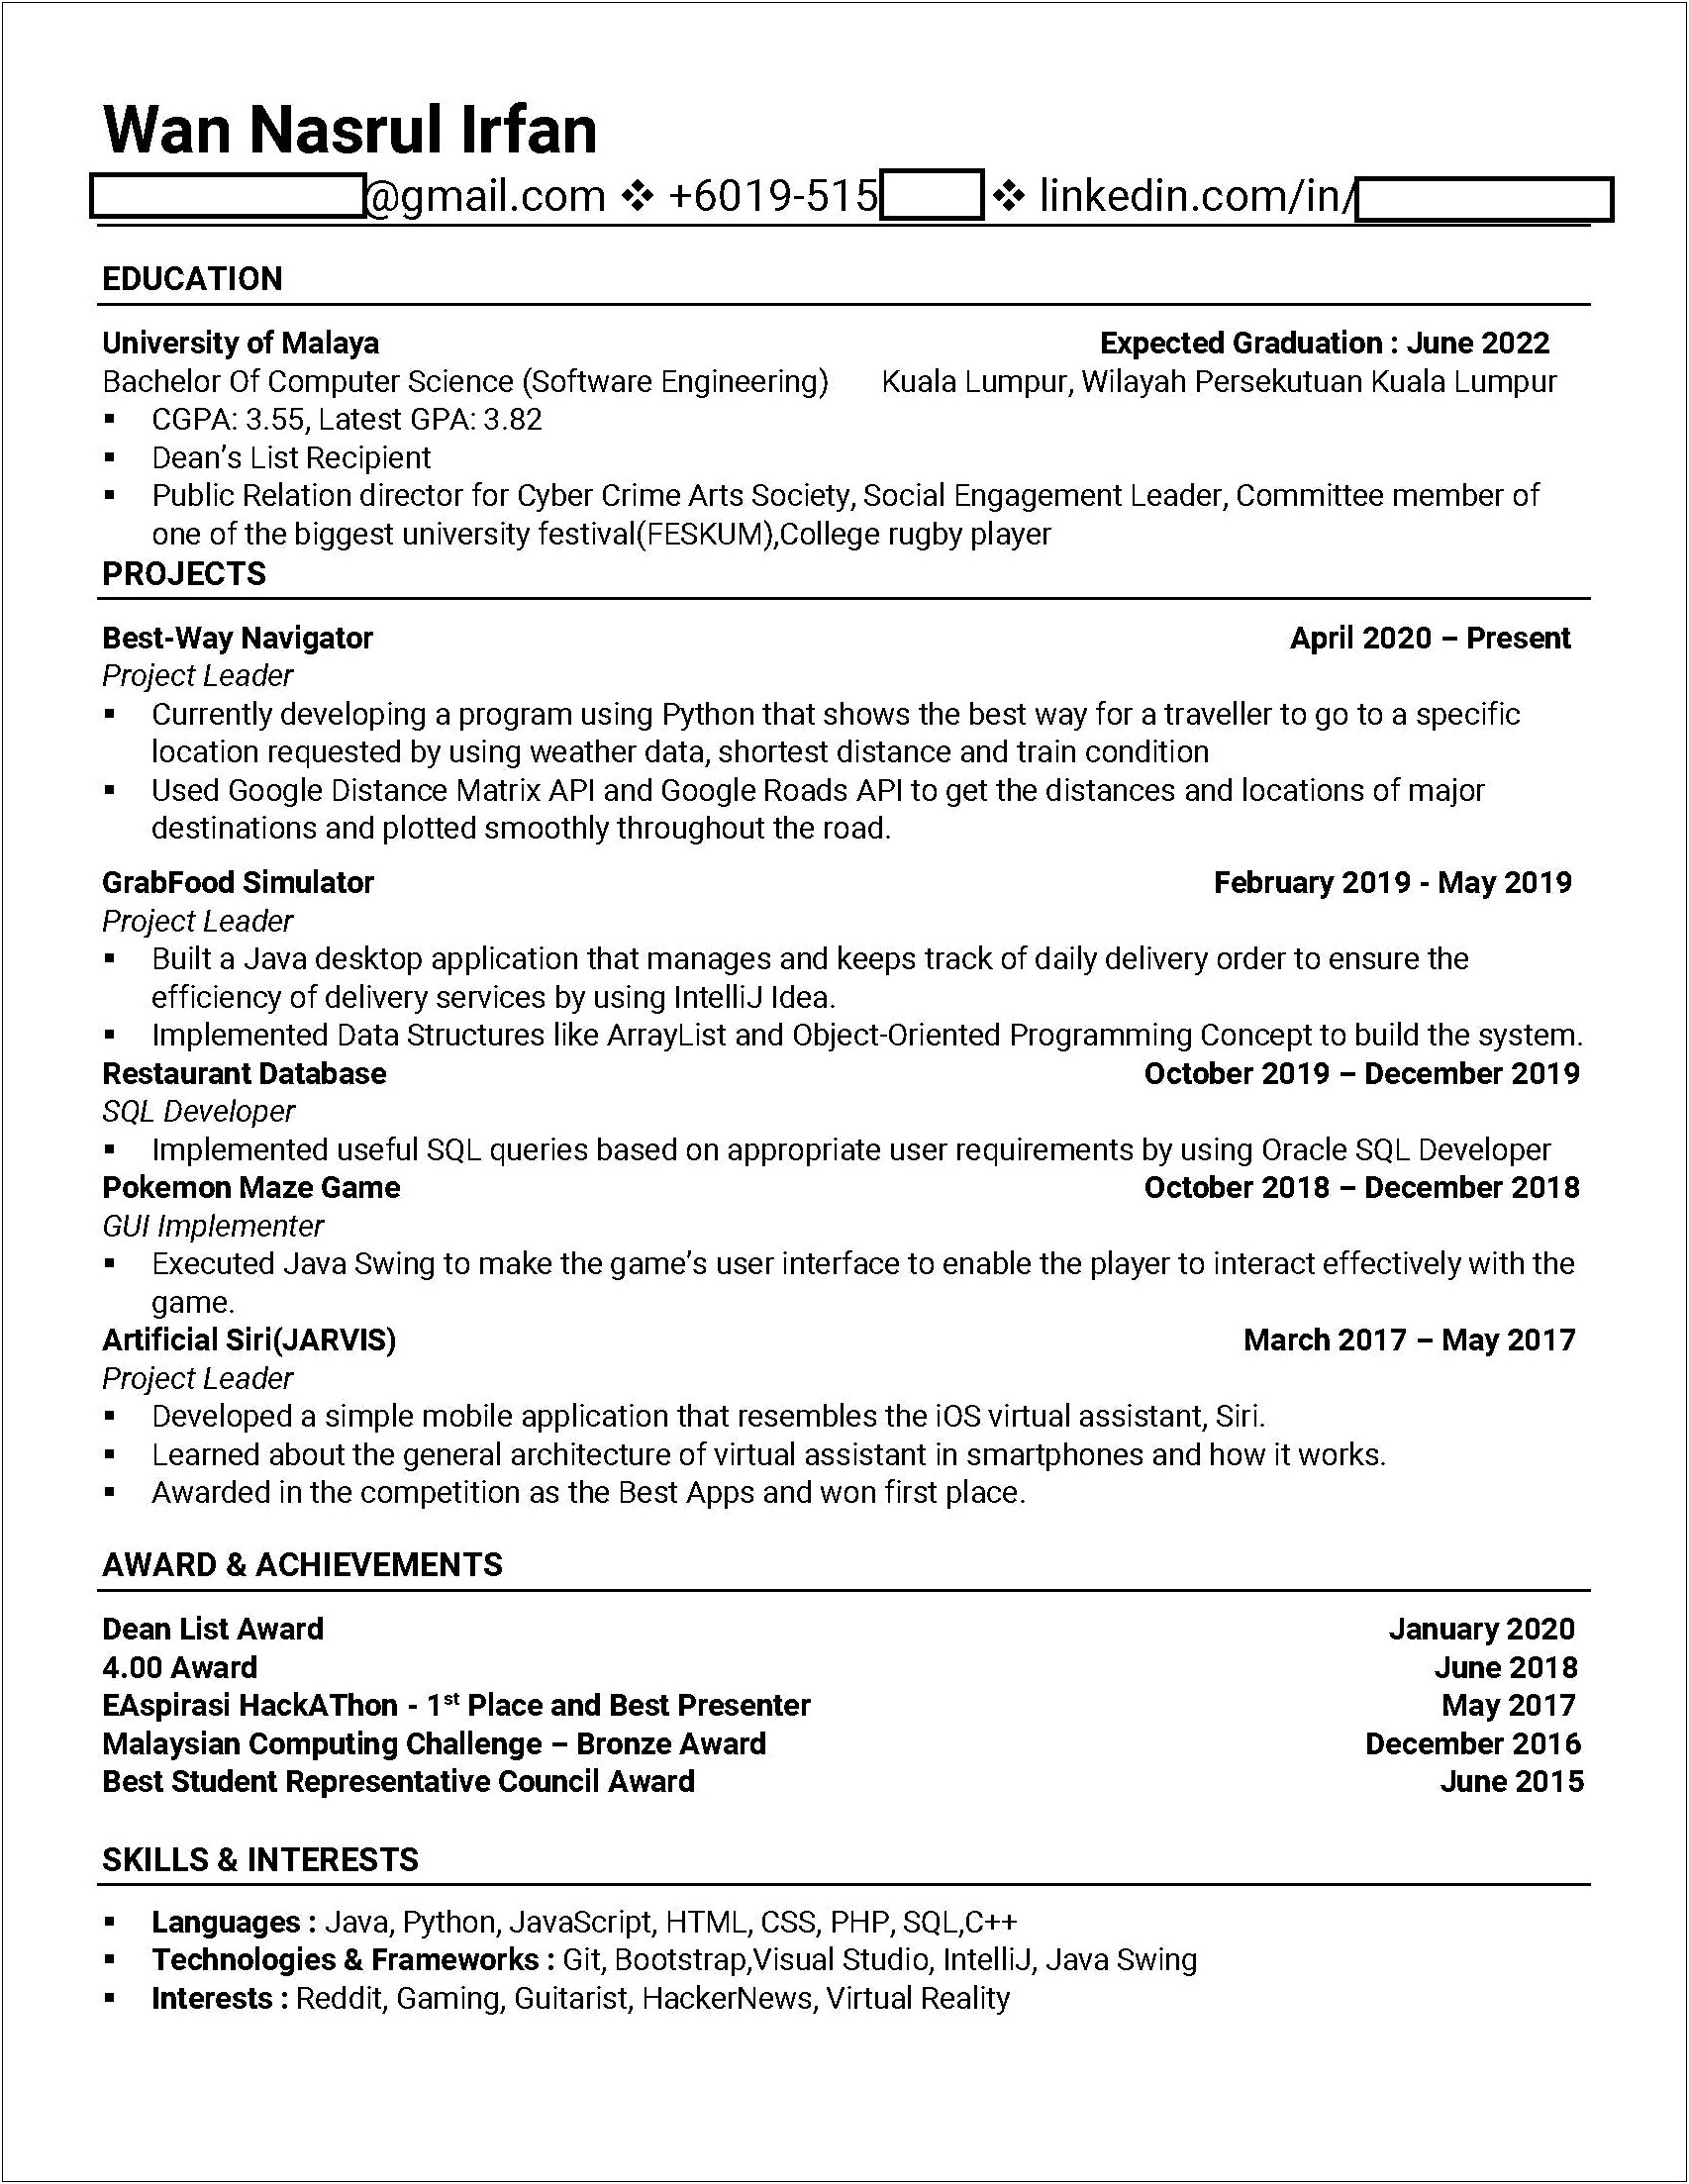 Sample Resume For Practical Student In Malaysia